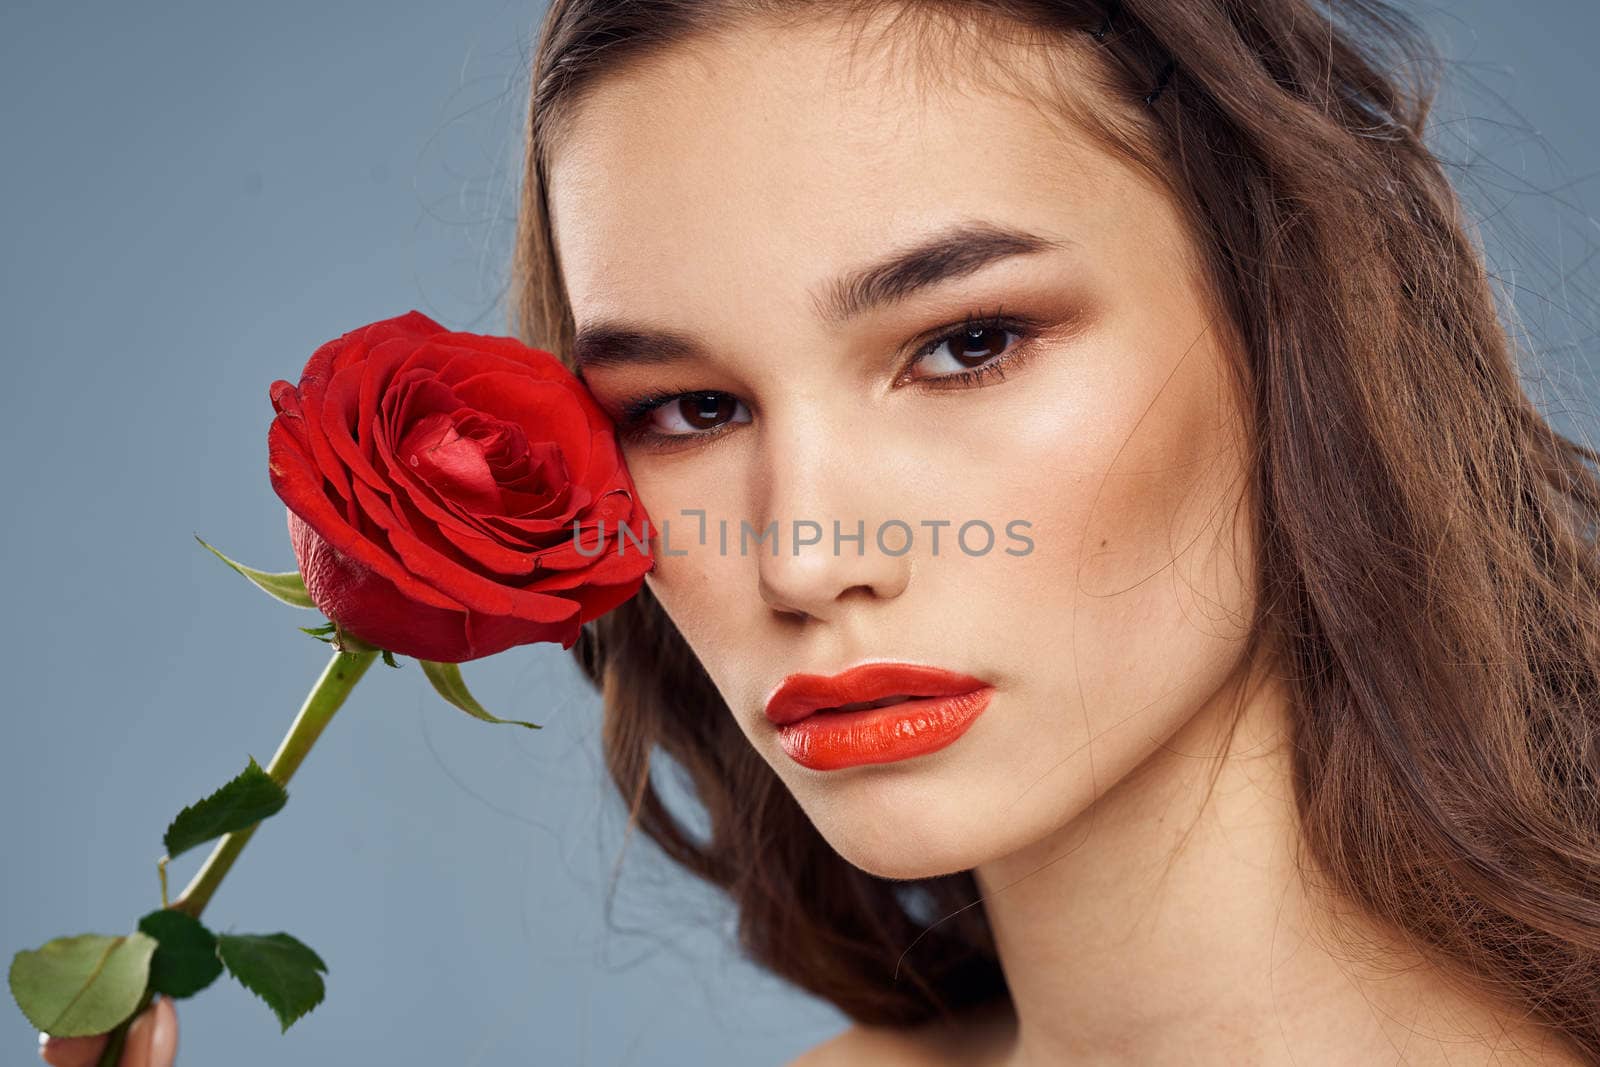 woman with a rose in her hands naked shoulders evening makeup red lips by SHOTPRIME